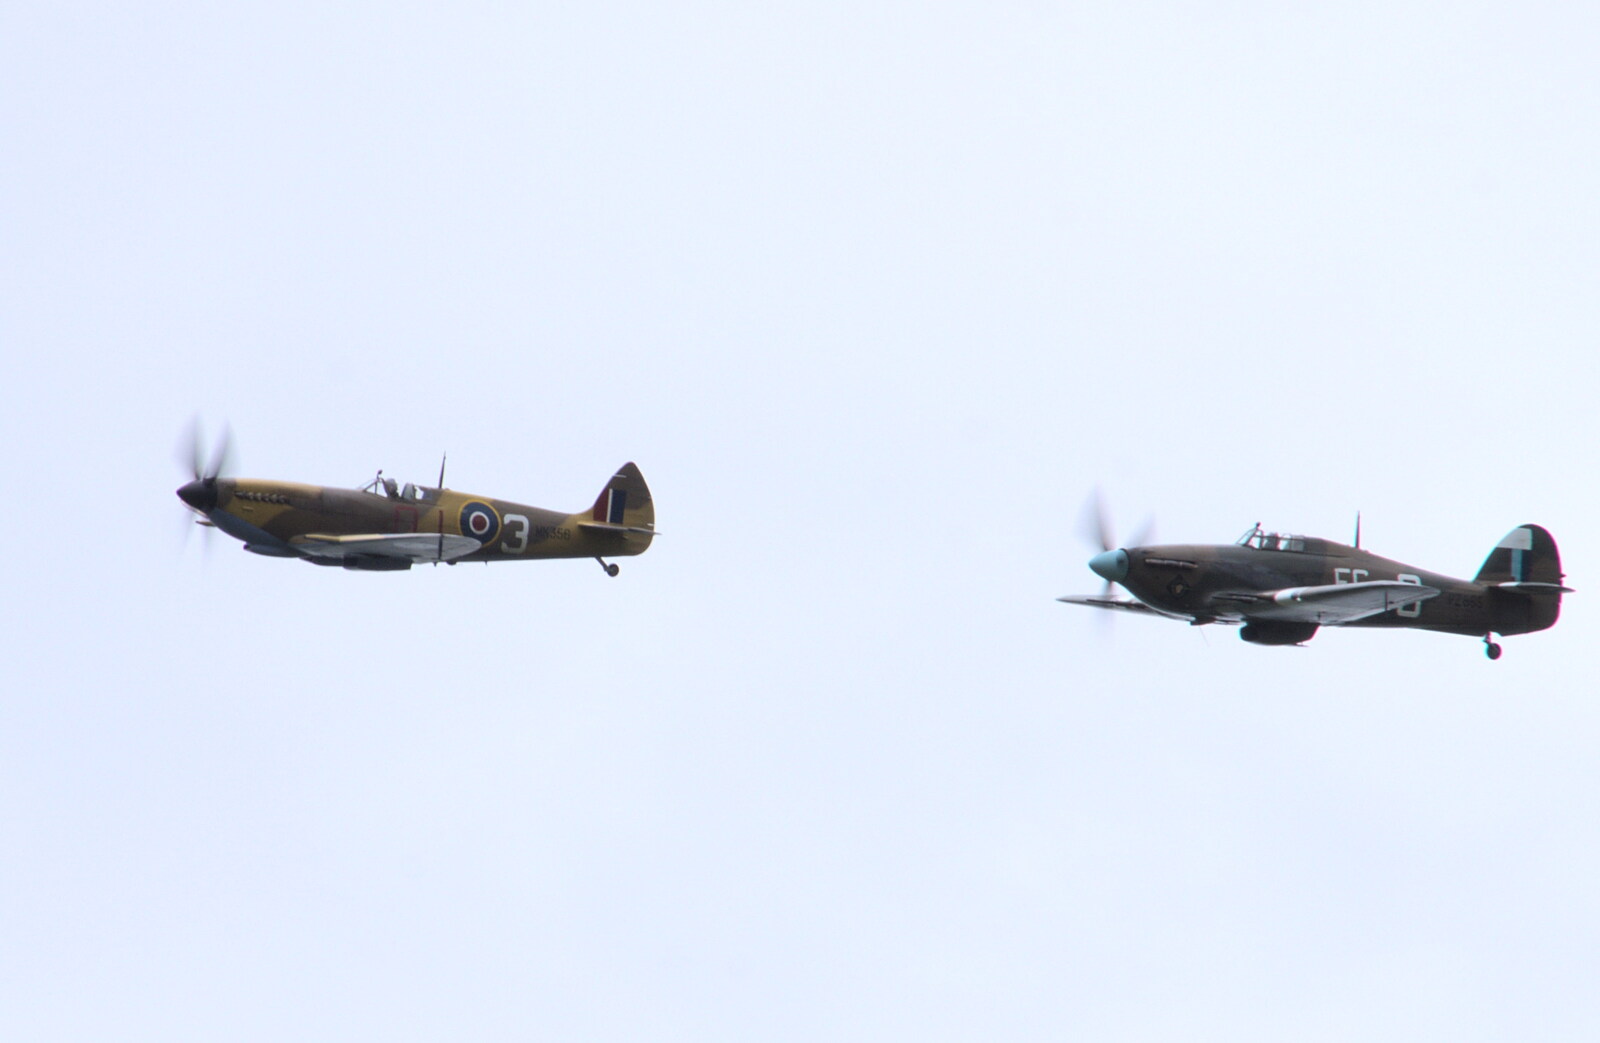 The BBMF, without the Lancaster, does a fly by from The Formerly-Known-As-The-Eye-Show, Palgrave, Suffolk - 17th June 2018